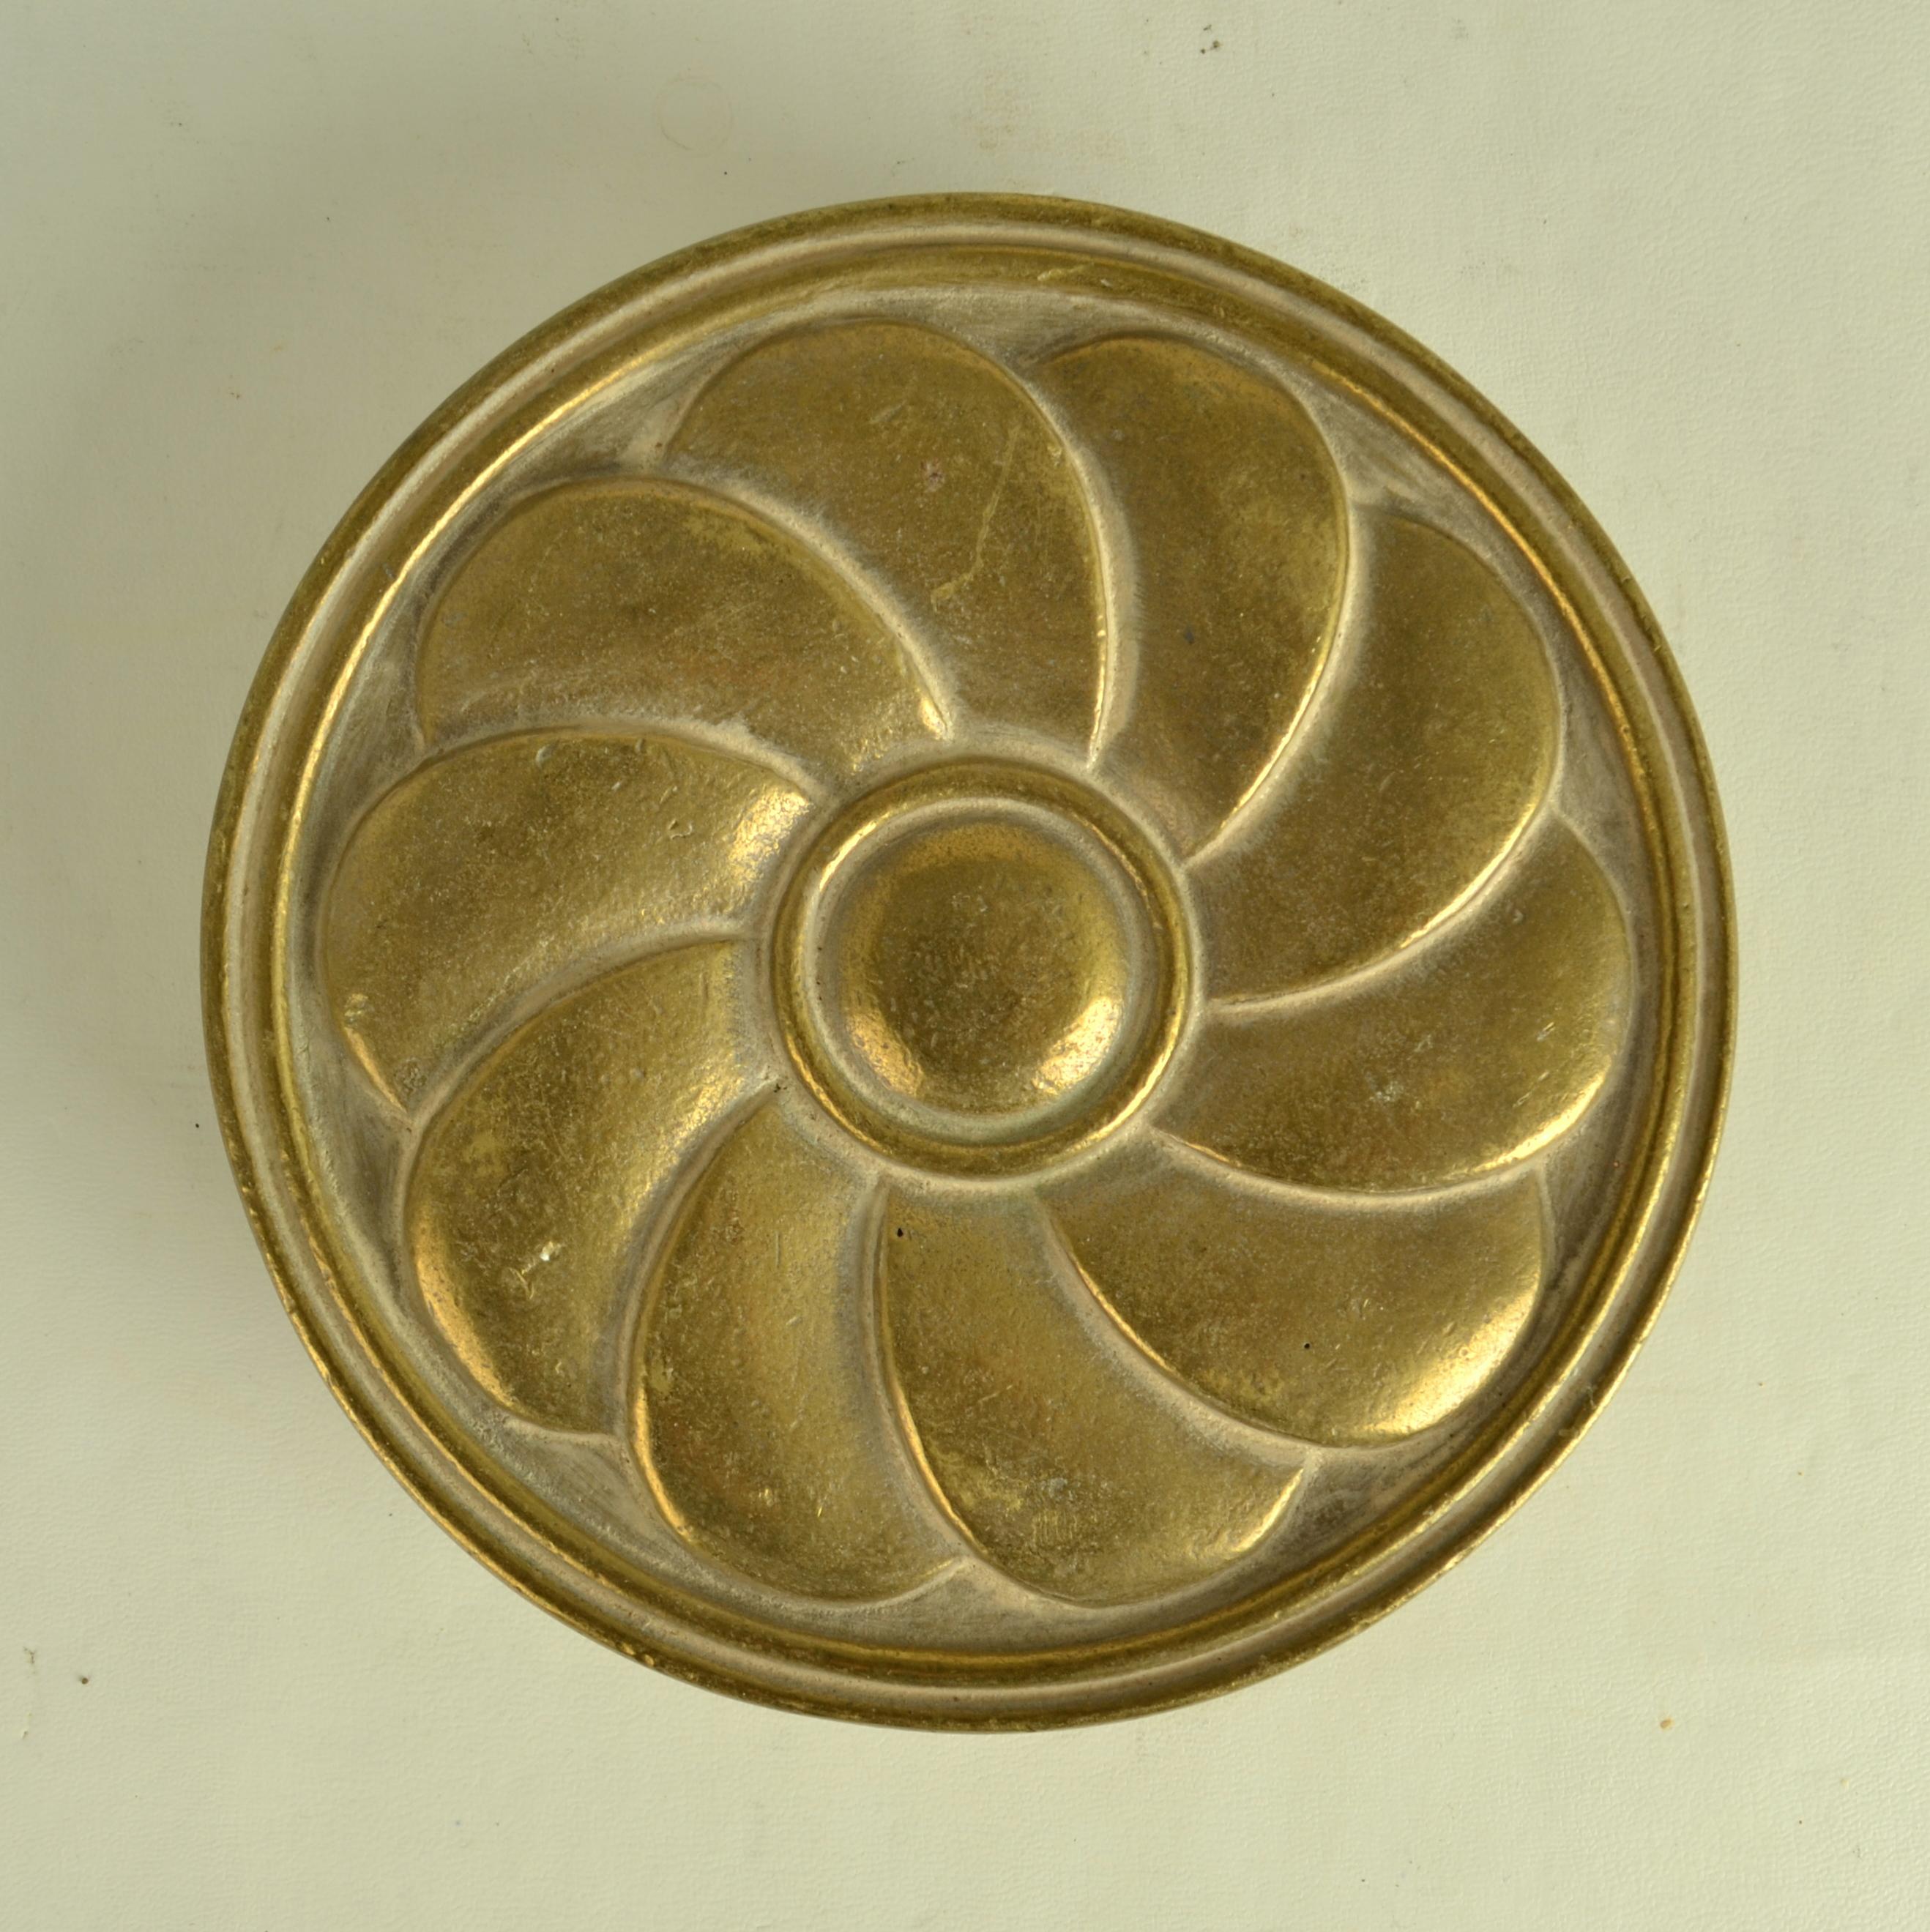 Pair of round push and pull door handles cast in bronze with geometric flower relief are very decorative. They give doors an outstanding character and are produced in the 1970's.
The identical handles can be applied on double doors together or on a